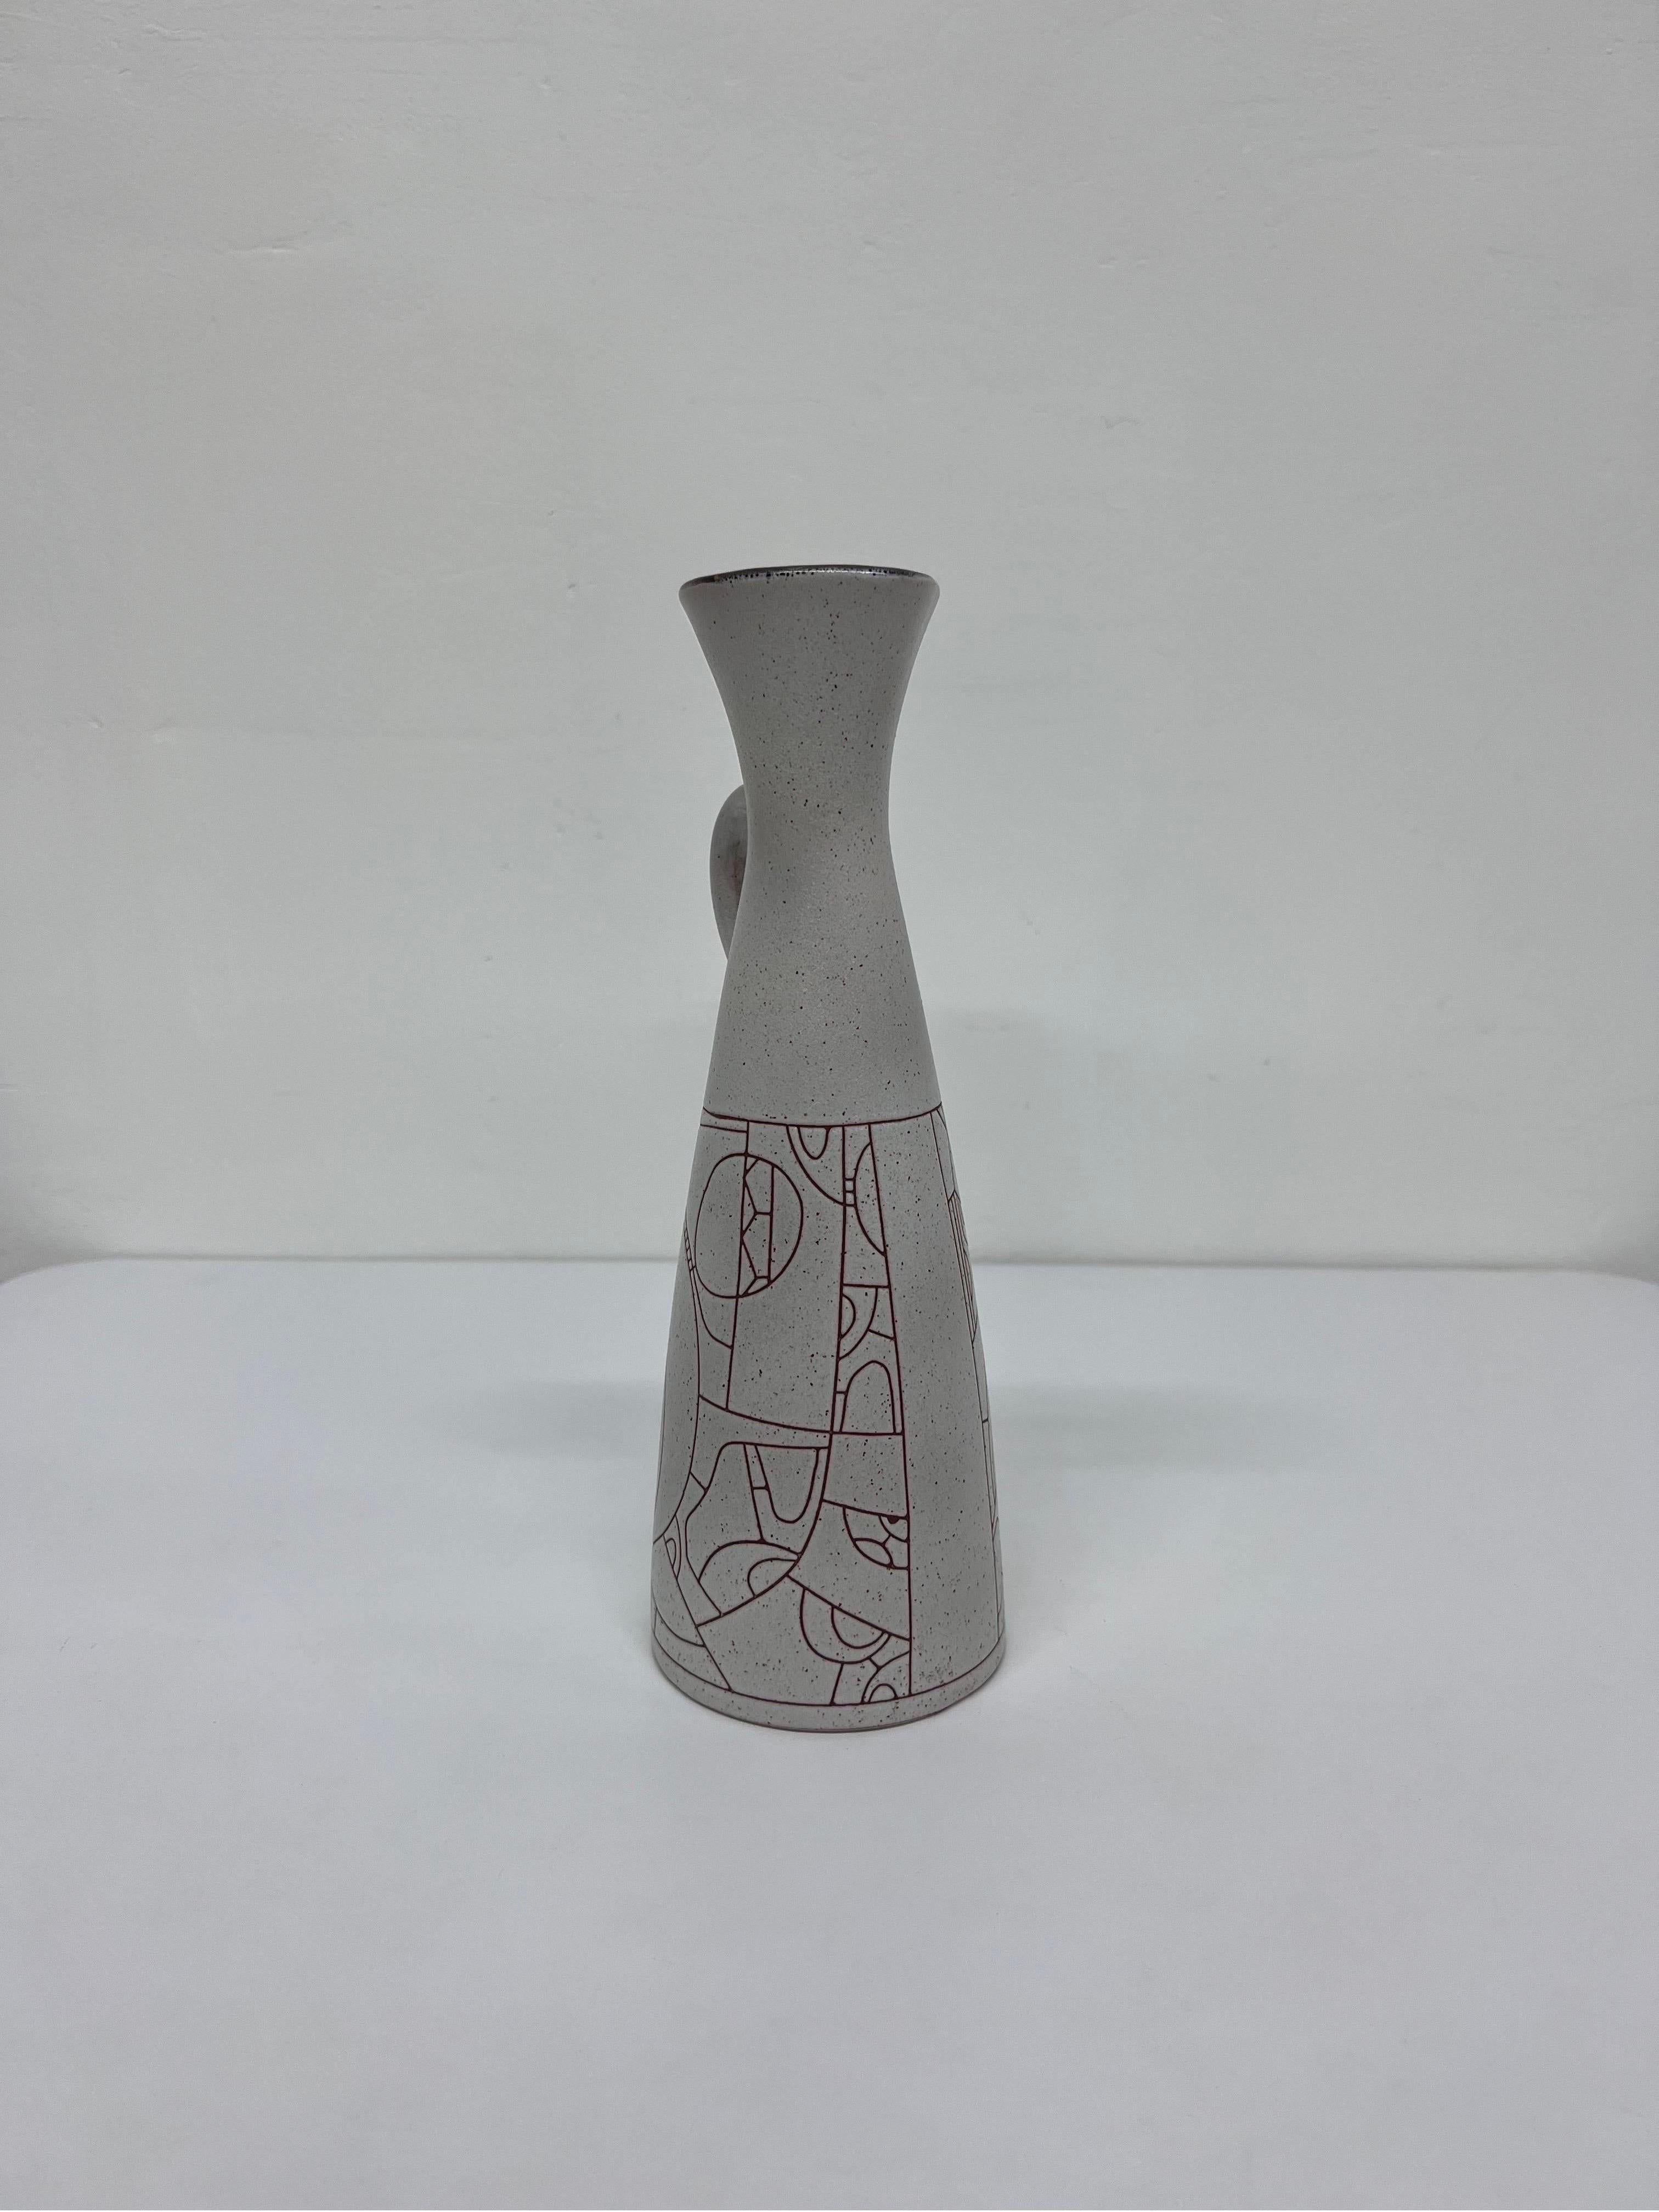 Israeli Modernist Geometric Stoneware Carafe or Pitcher by Lapid Israel Pottery